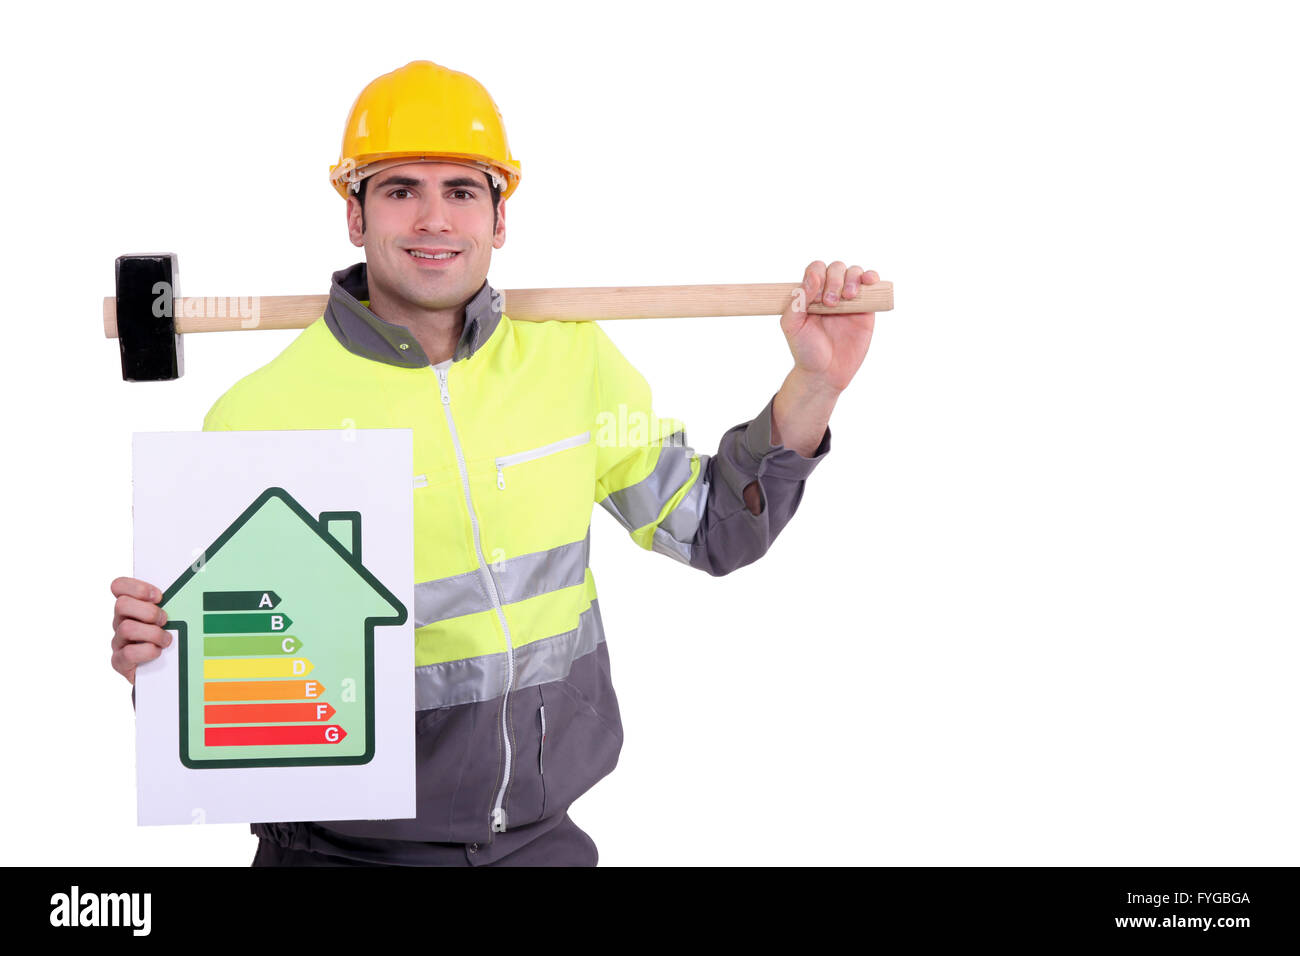 Construction worker with an energy rating card Stock Photo